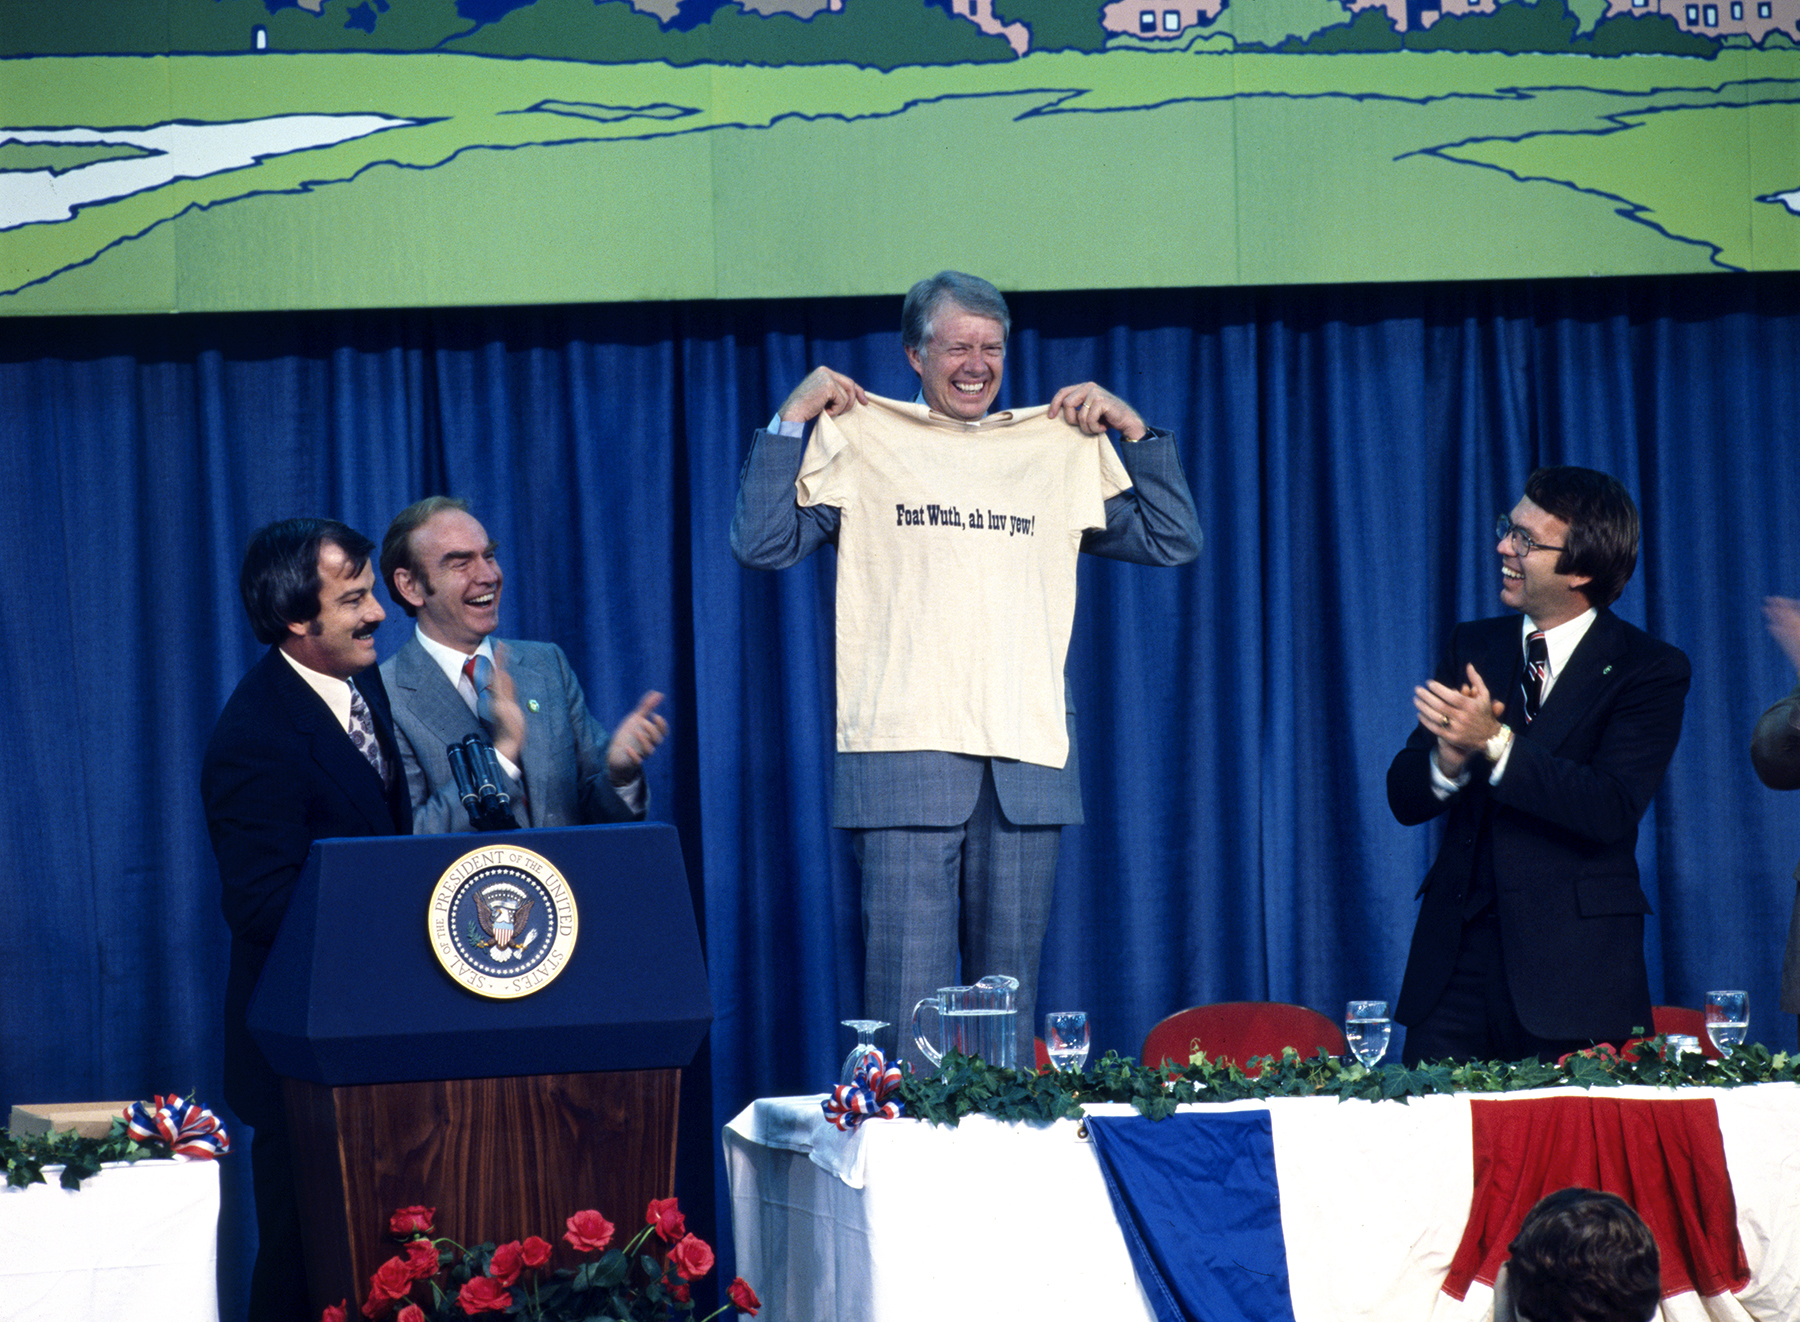 Color photo of President Jimmy Carter holding a shirt reading "Foat Wuth, ah luc yew" while he is smiling and others around him are applauding.